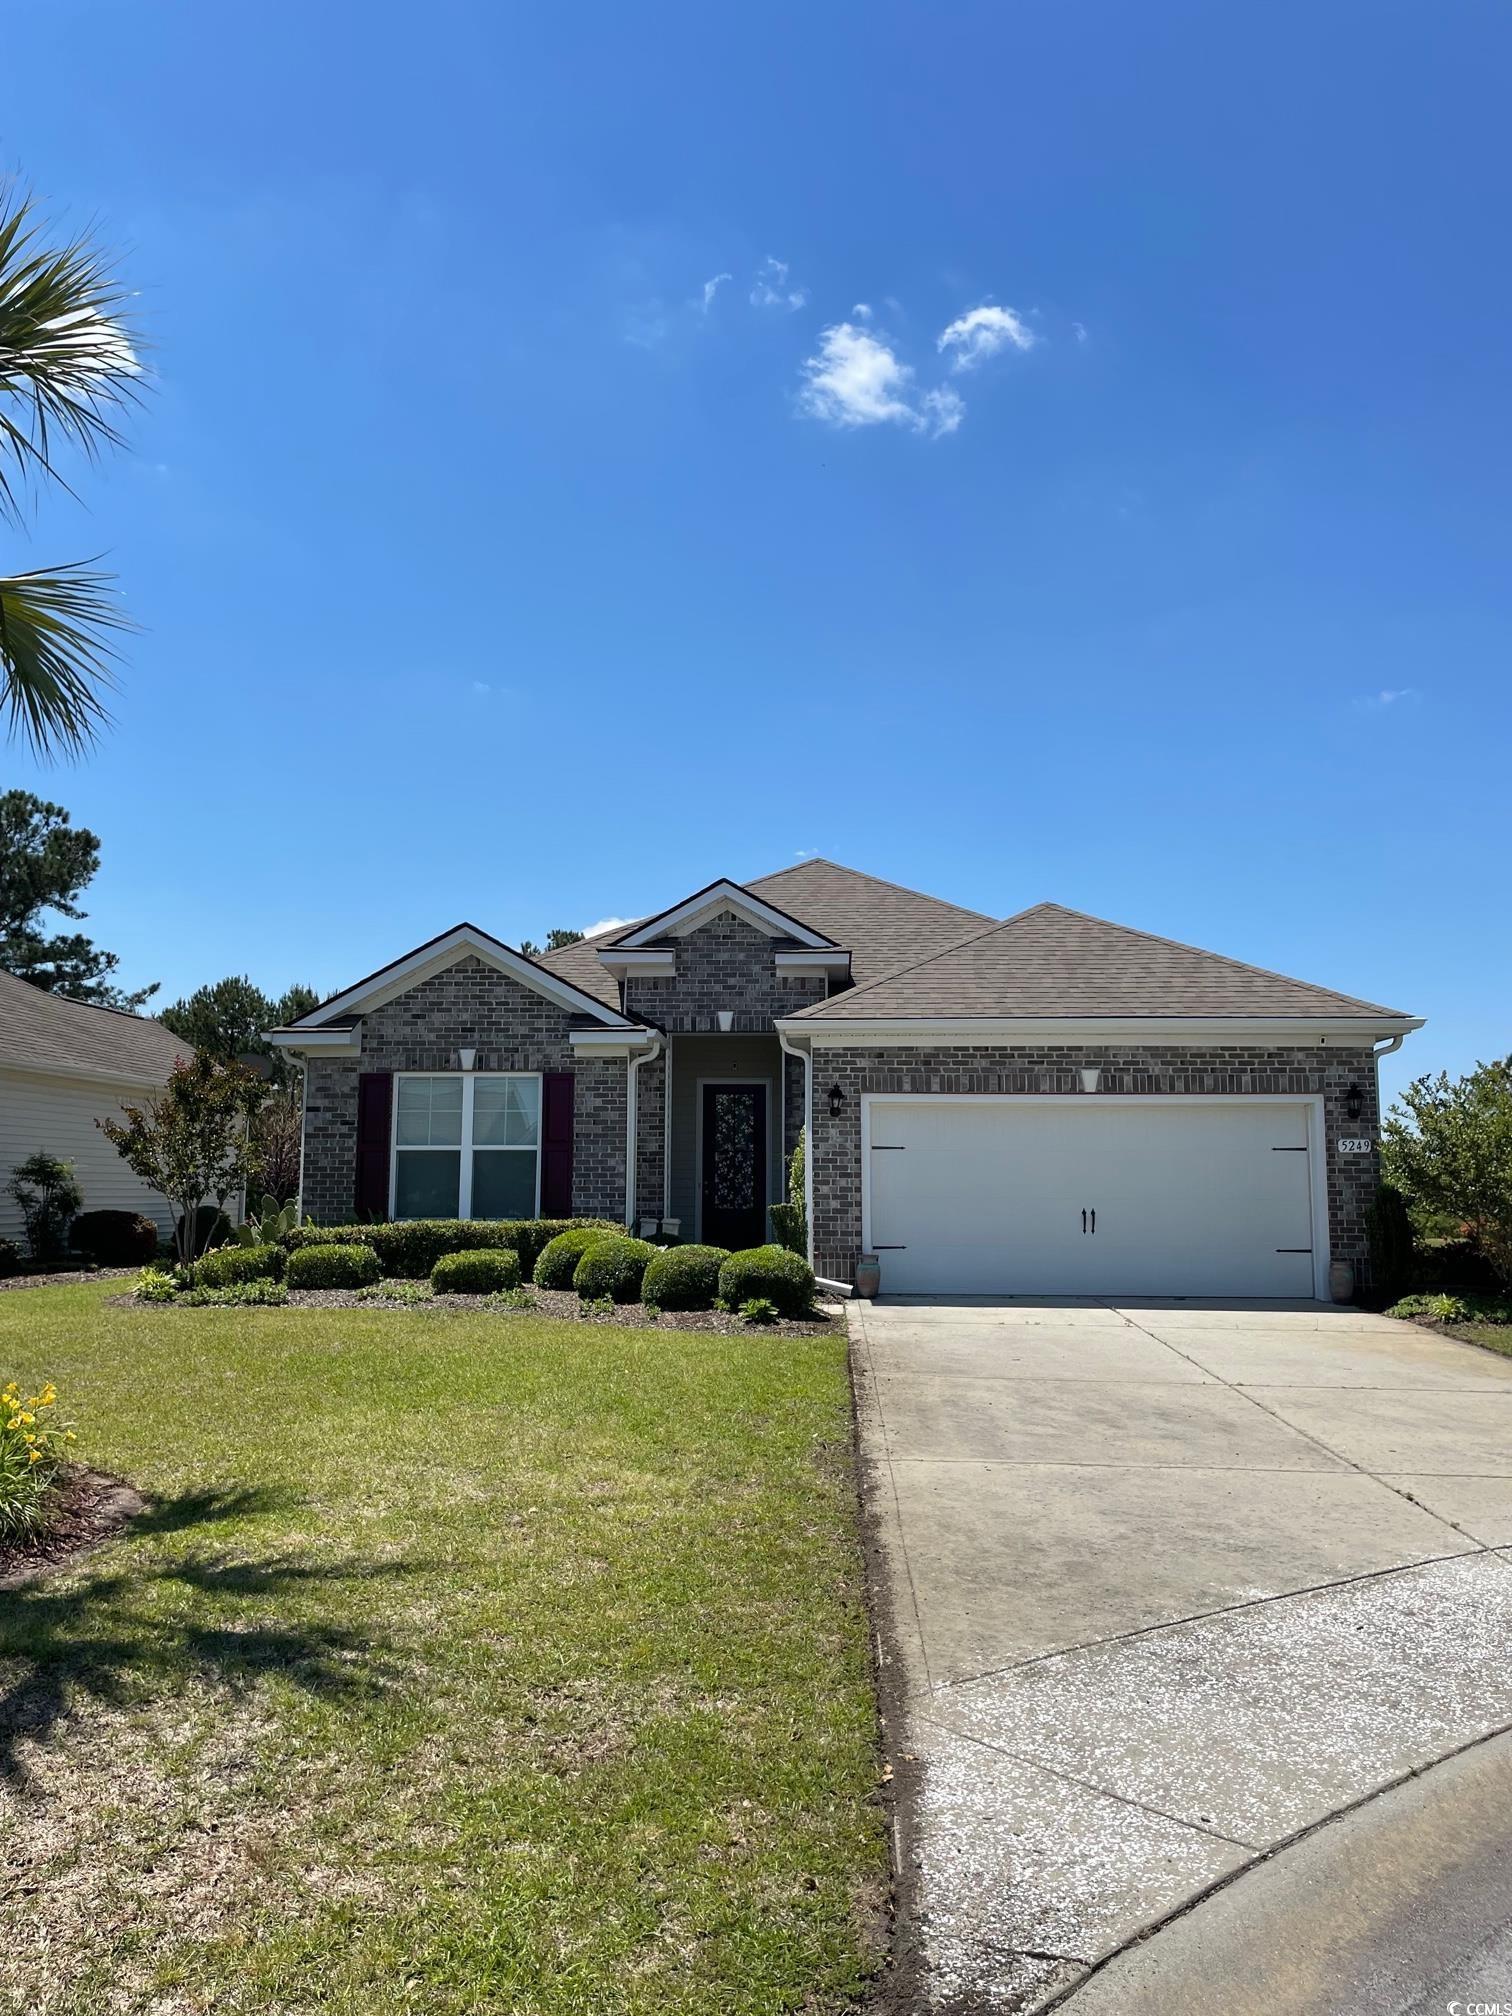 available now! located in the myrtle beach, tuscany 55+ gated community. convenient to hwy 31, 501 and 17. quiet cul-des-sac 3 bed and 2 bath with a large all season room and rear patio offering water views. tile wood look flooring in kitchen, living room, dining area and sunroom. 3 bedrooms have carpet. gas fireplace, large kitchen with and island and additional serving counter with tons of cabinets and a walk in pantry allows for plenty of storage.  main bath has a tiled shower with double sink vanity.  lease includes use of the amenities. there is a large resort style pool, fitness room, high speed internet thru htc, lawn maintenance, edging and garbage service weekly.